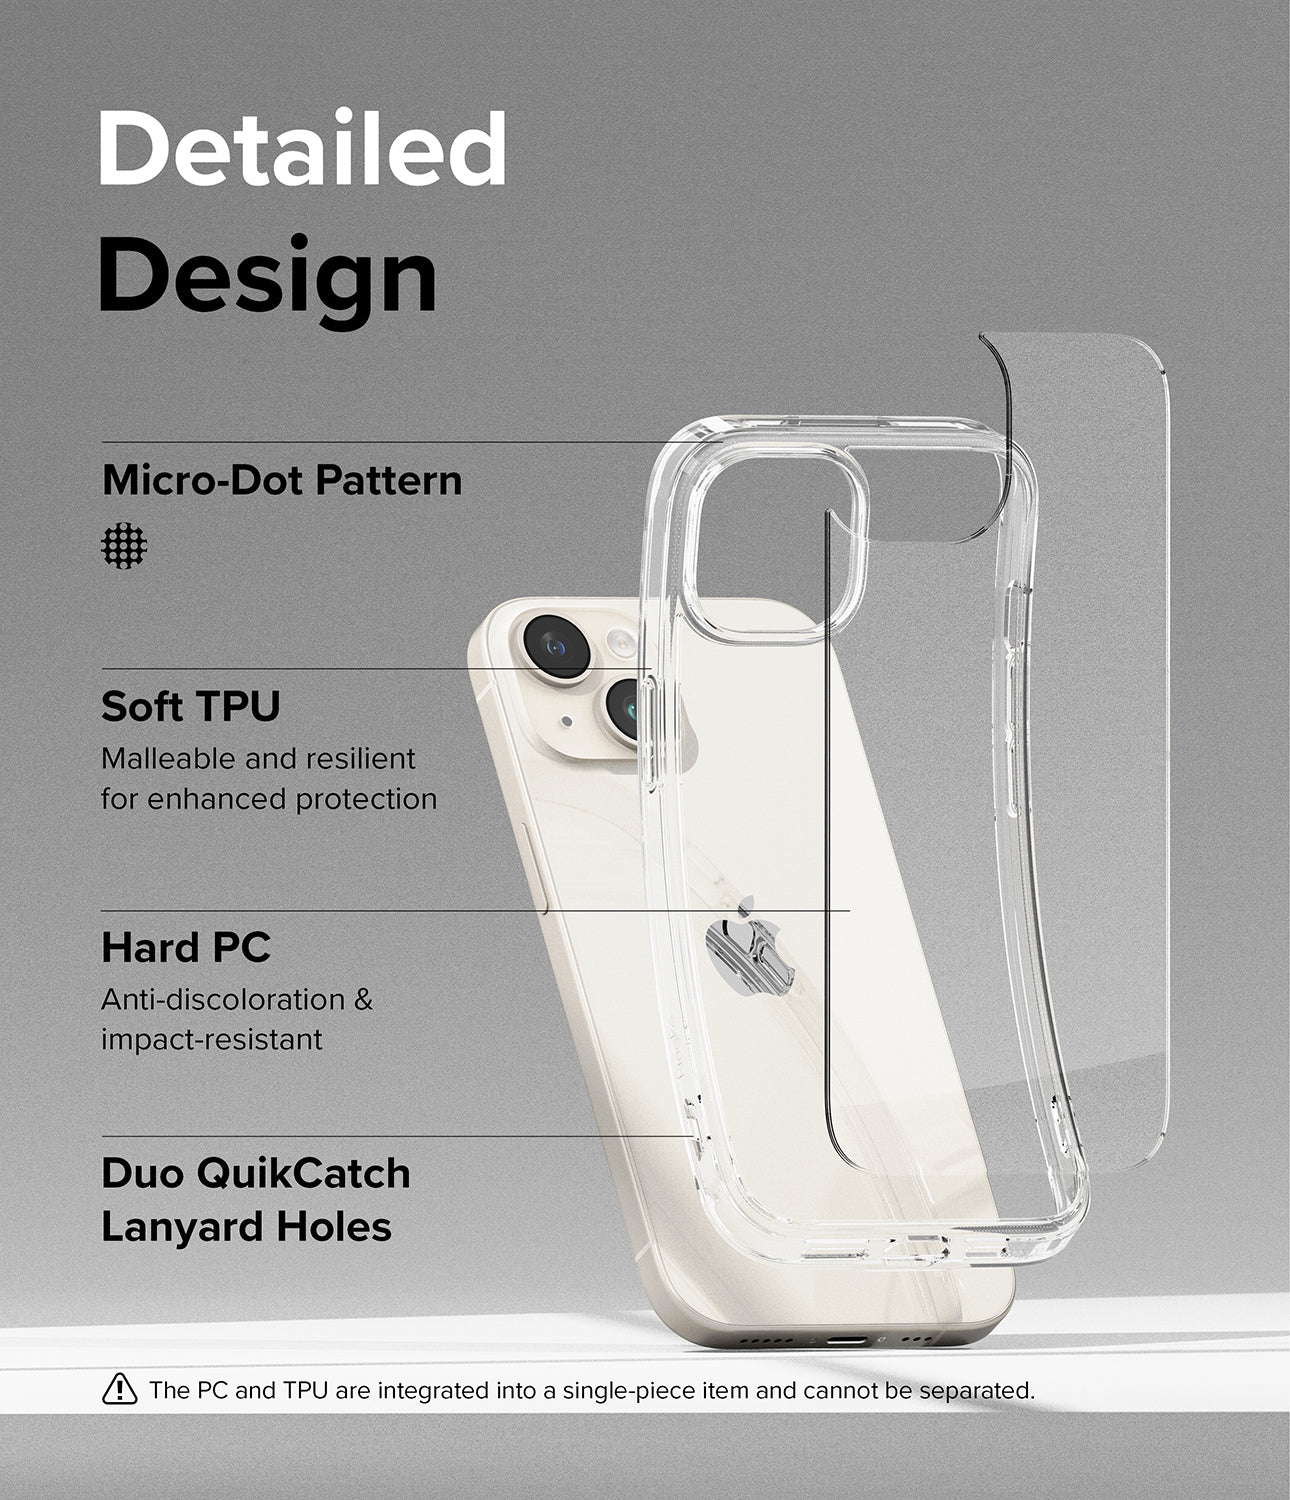 iPhone 15 Plus Case | Fusion - Clear- Detailed Design. Micro-Dot Pattern. Malleable and resilient for enhanced protection with Soft TPU. Anti-discoloration and impact-resistant. Duo QuikCatch Lanyard Holes.